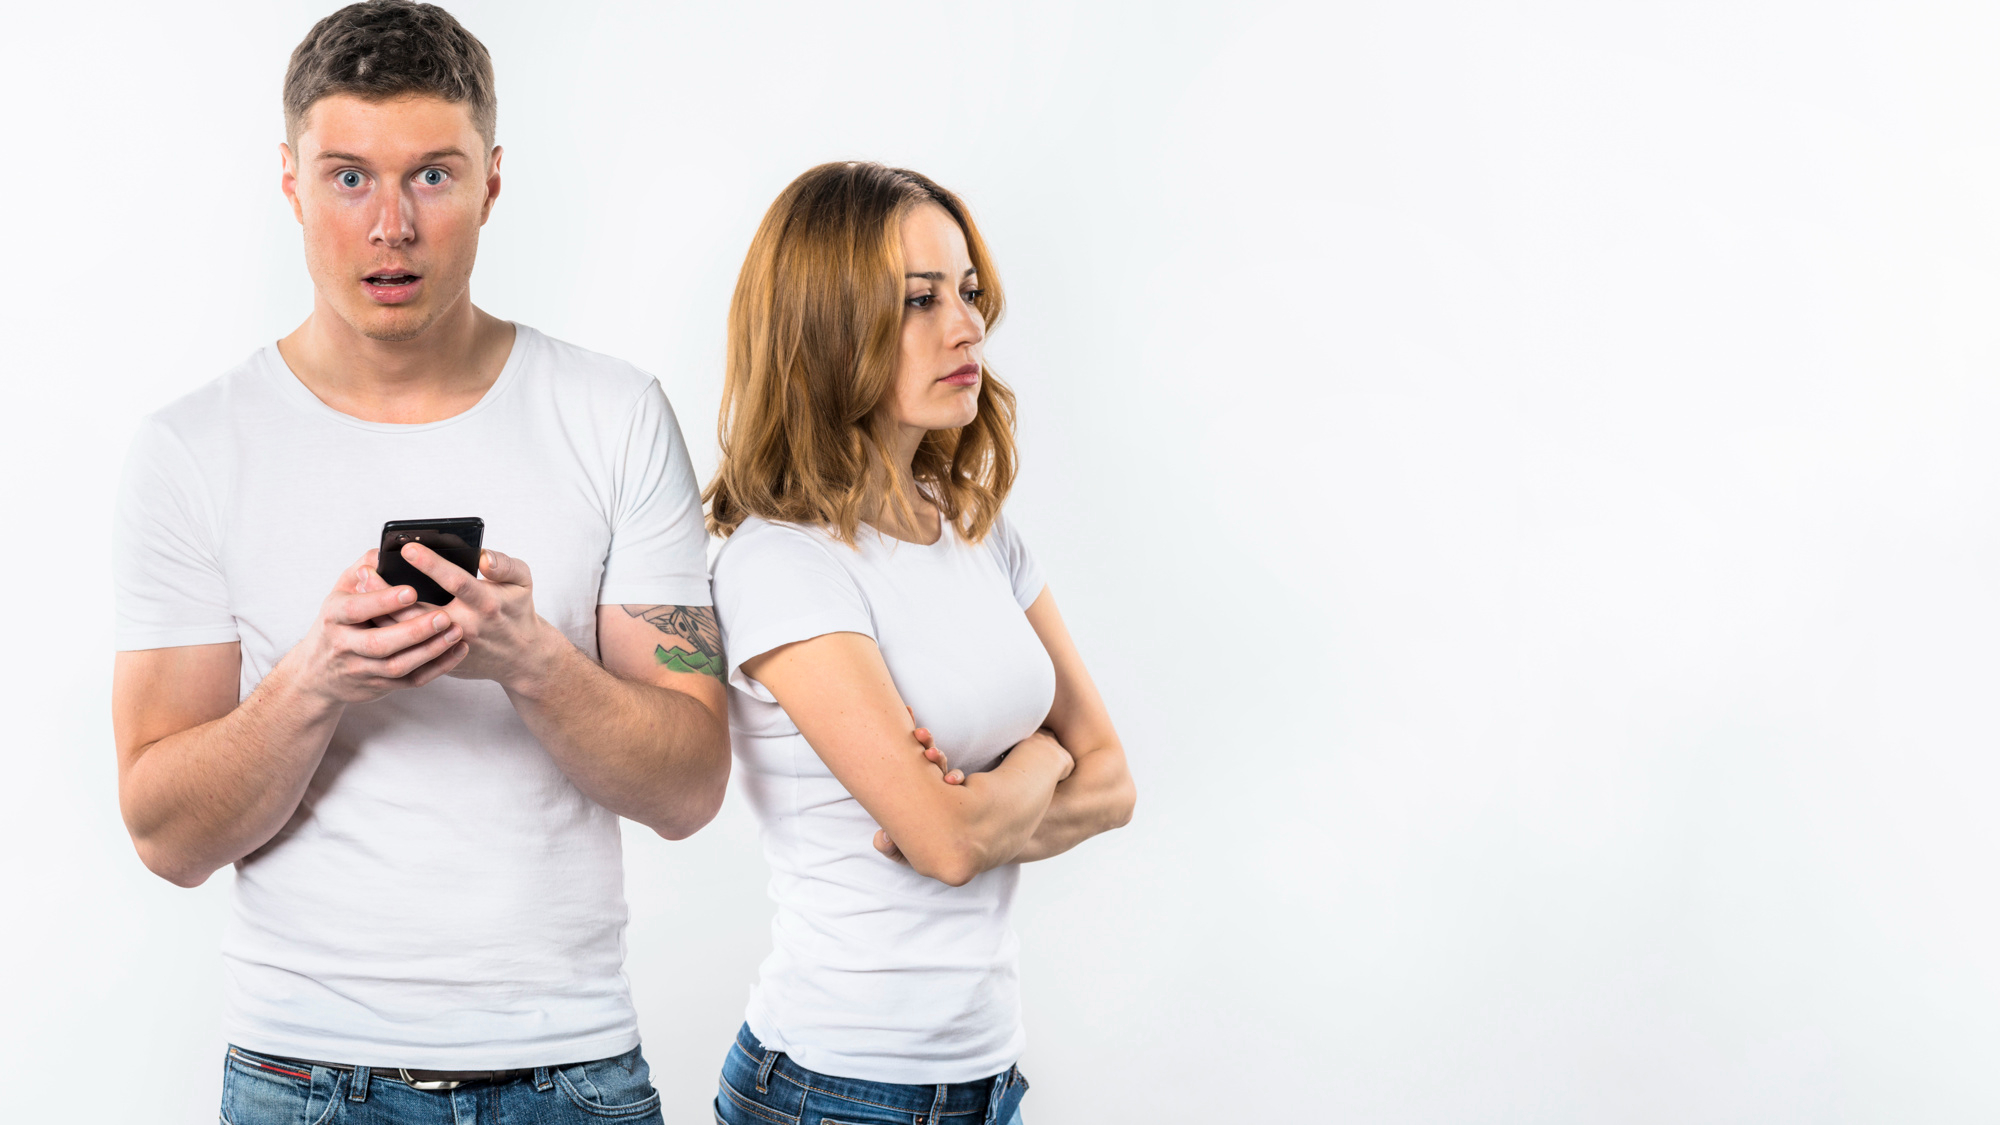 A man shocked while holding a phone while a woman gives him the cold shoulder | Source: Freepik